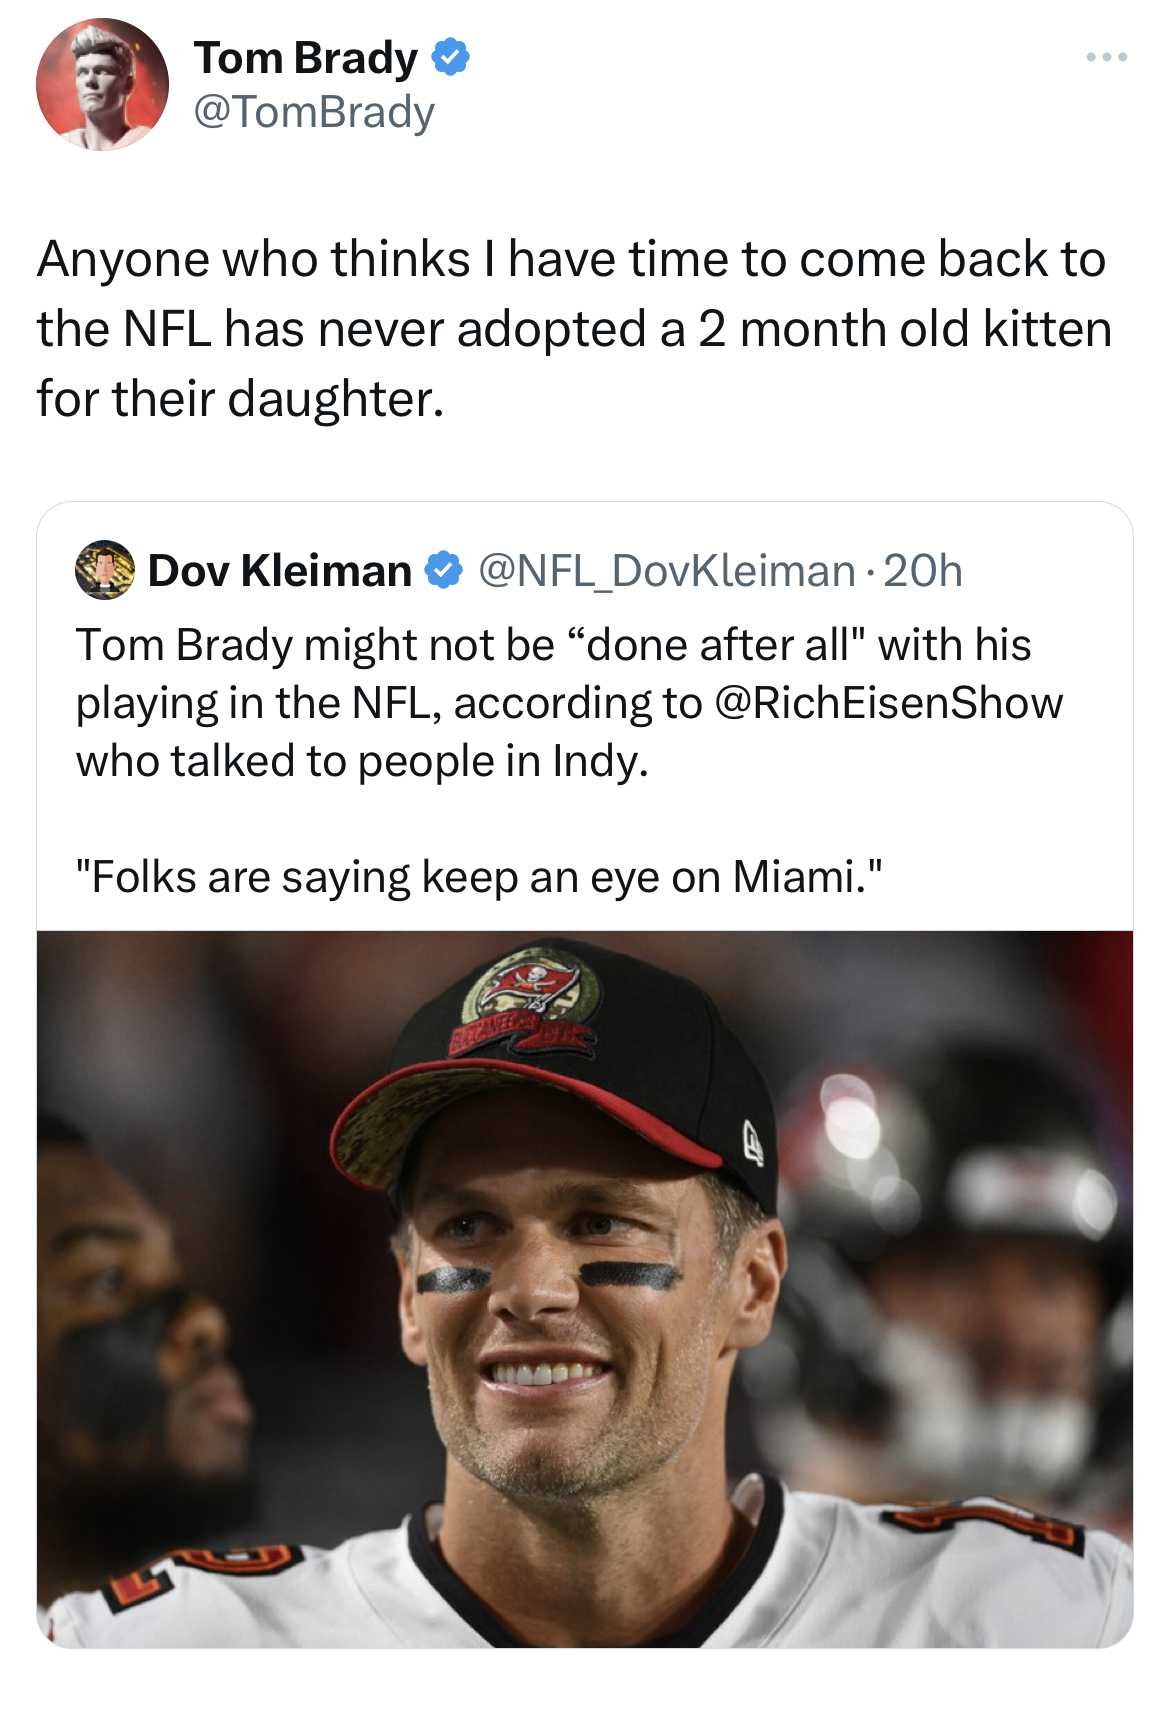 savage tweets - Tom Brady - Leb Tom Brady Anyone who thinks I have time to come back to the Nfl has never adopted a 2 month old kitten for their daughter. Dov Kleiman Tom Brady might not be "done after all" with his playing in the Nfl, according to who ta